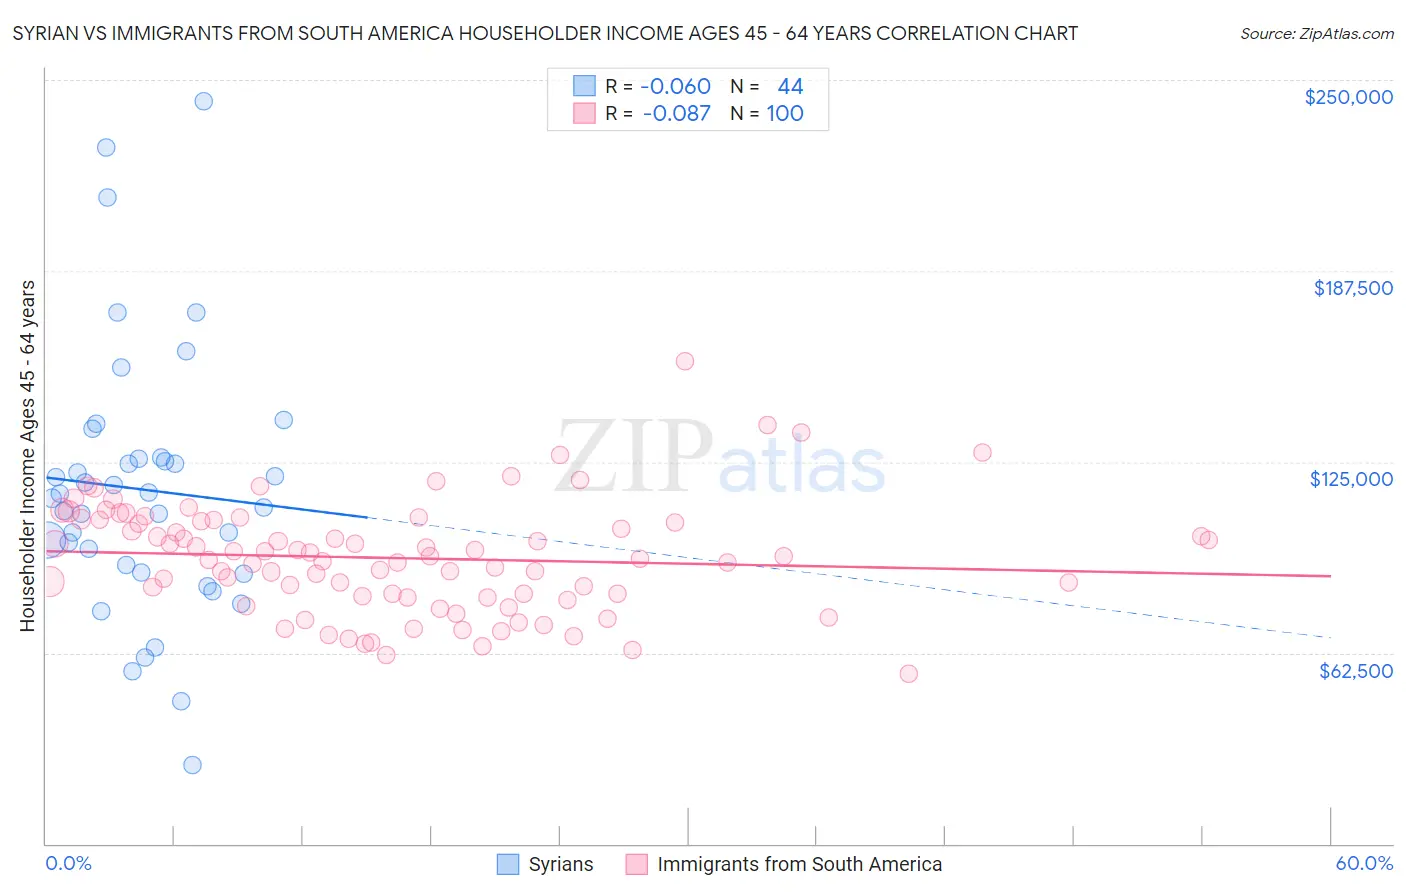 Syrian vs Immigrants from South America Householder Income Ages 45 - 64 years